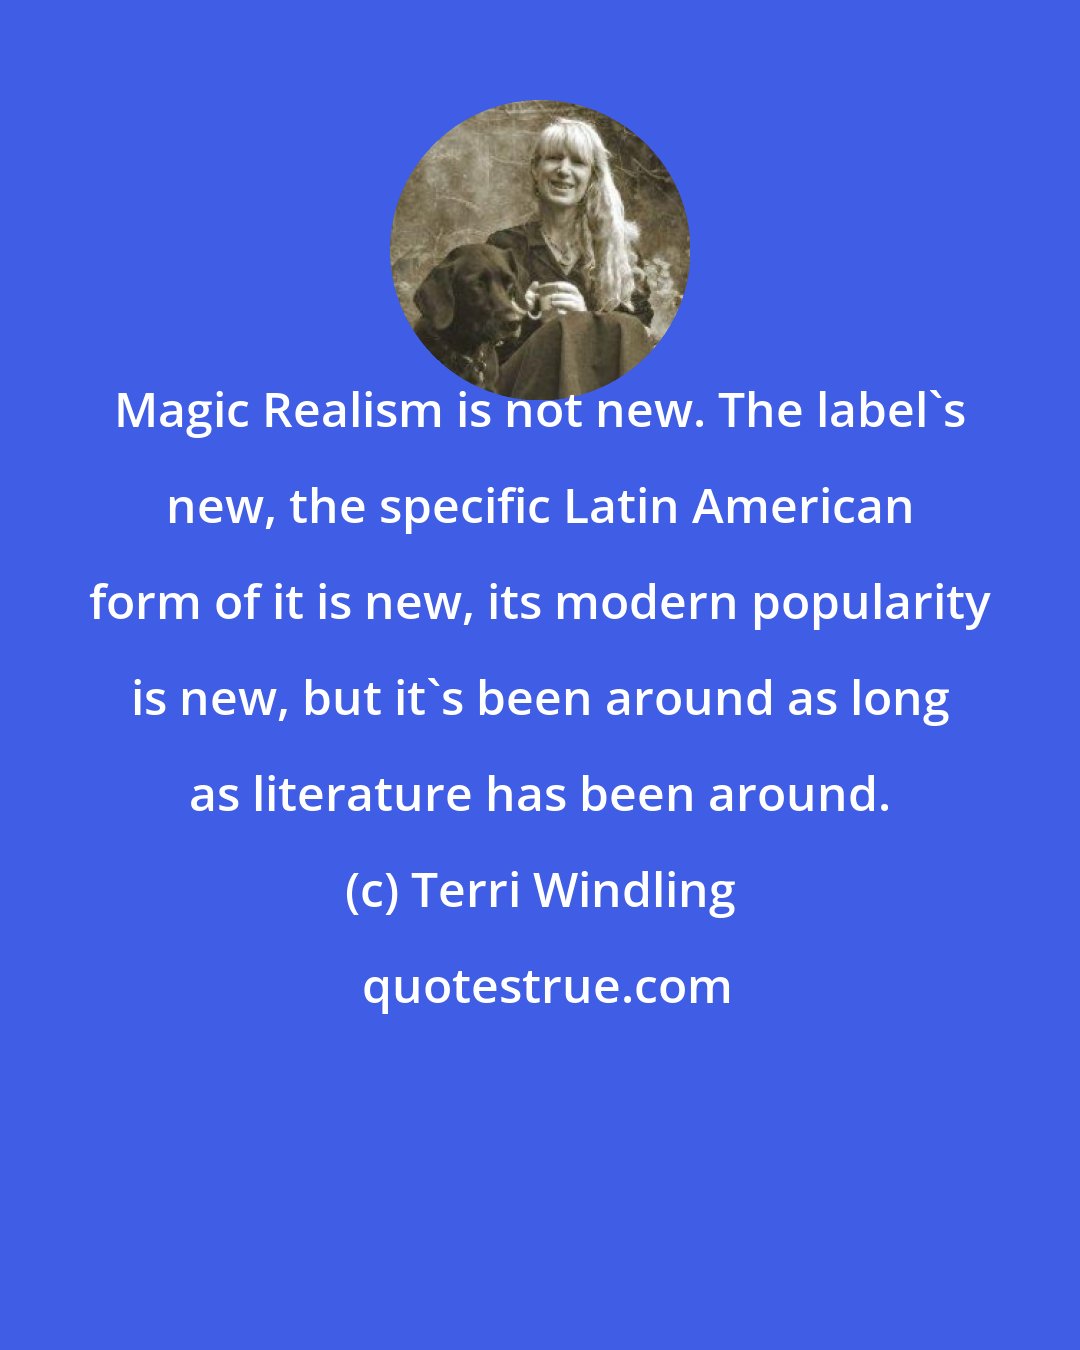 Terri Windling: Magic Realism is not new. The label's new, the specific Latin American form of it is new, its modern popularity is new, but it's been around as long as literature has been around.